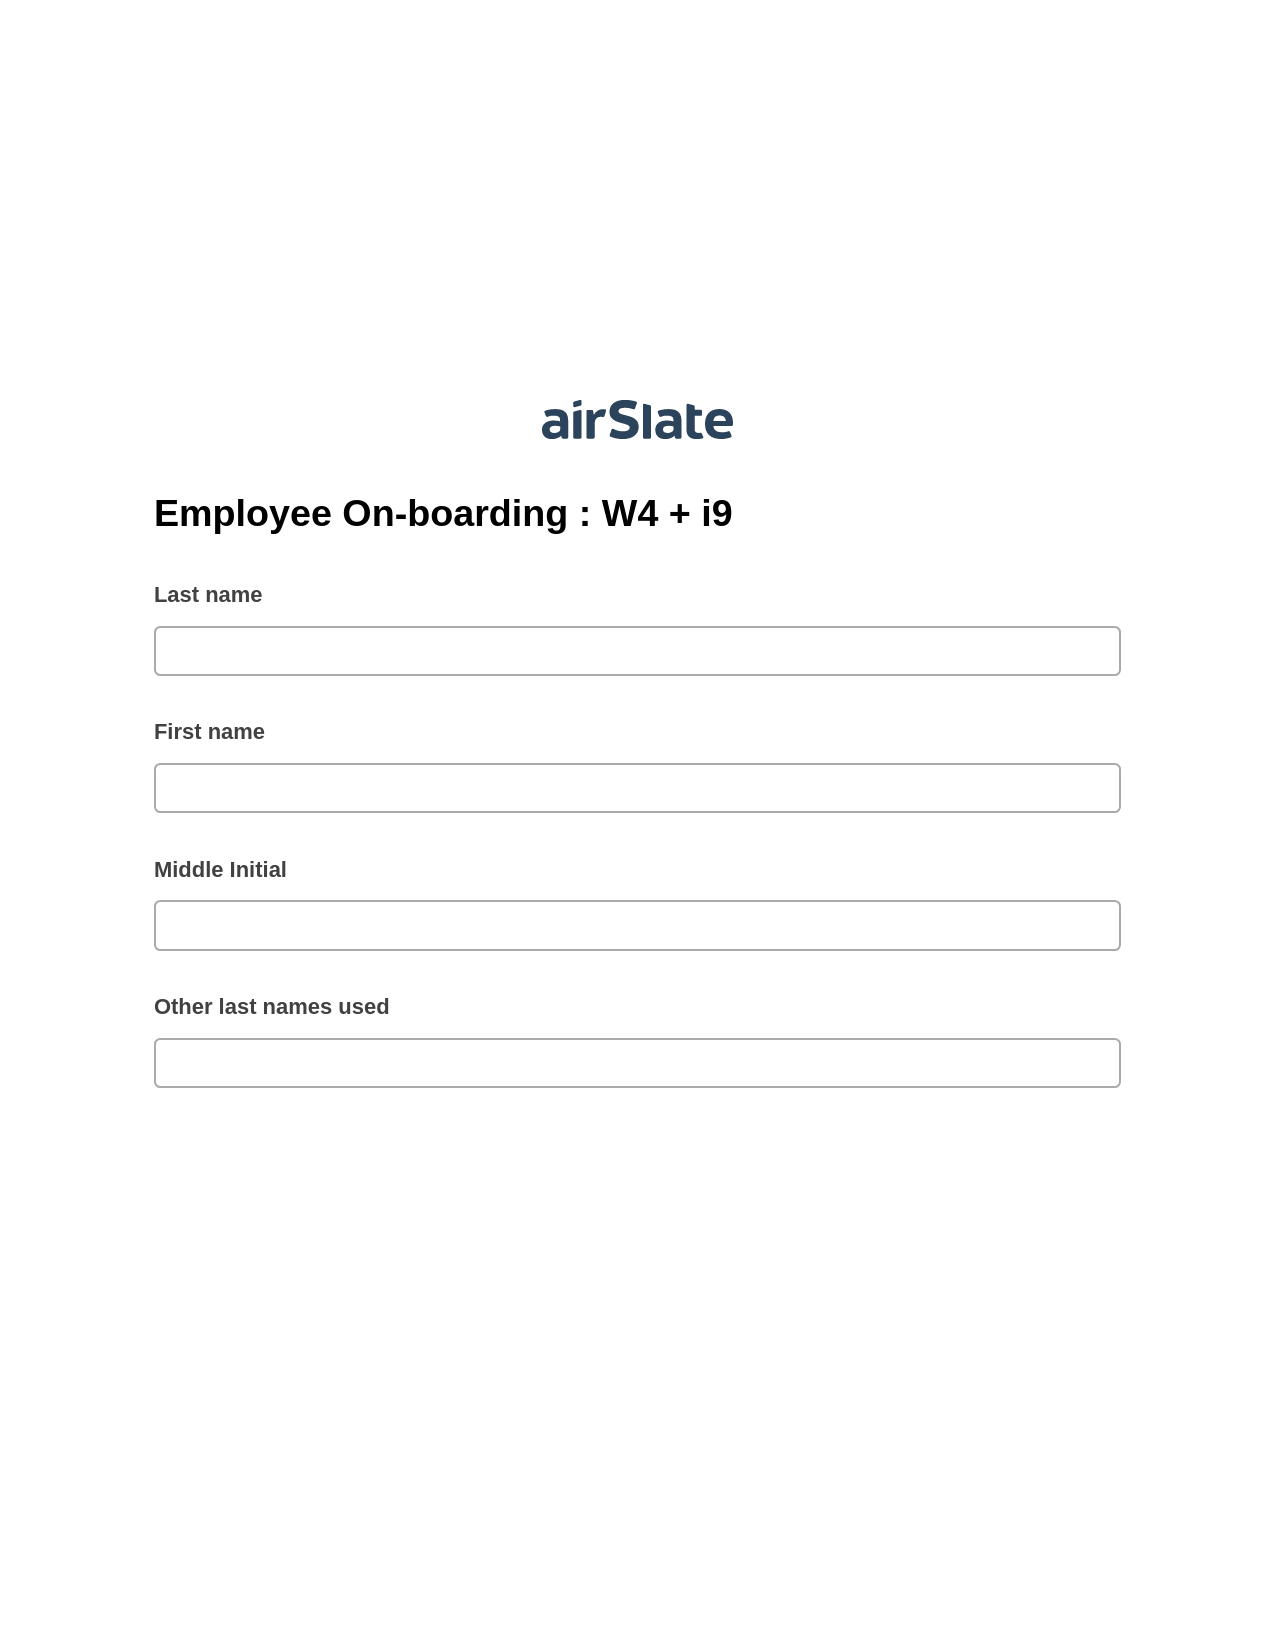 Employee On-boarding : W4 + i9 Pre-fill Slate from MS Dynamics 365 Records Bot, Send a Slate with Roles Bot, Dropbox Bot